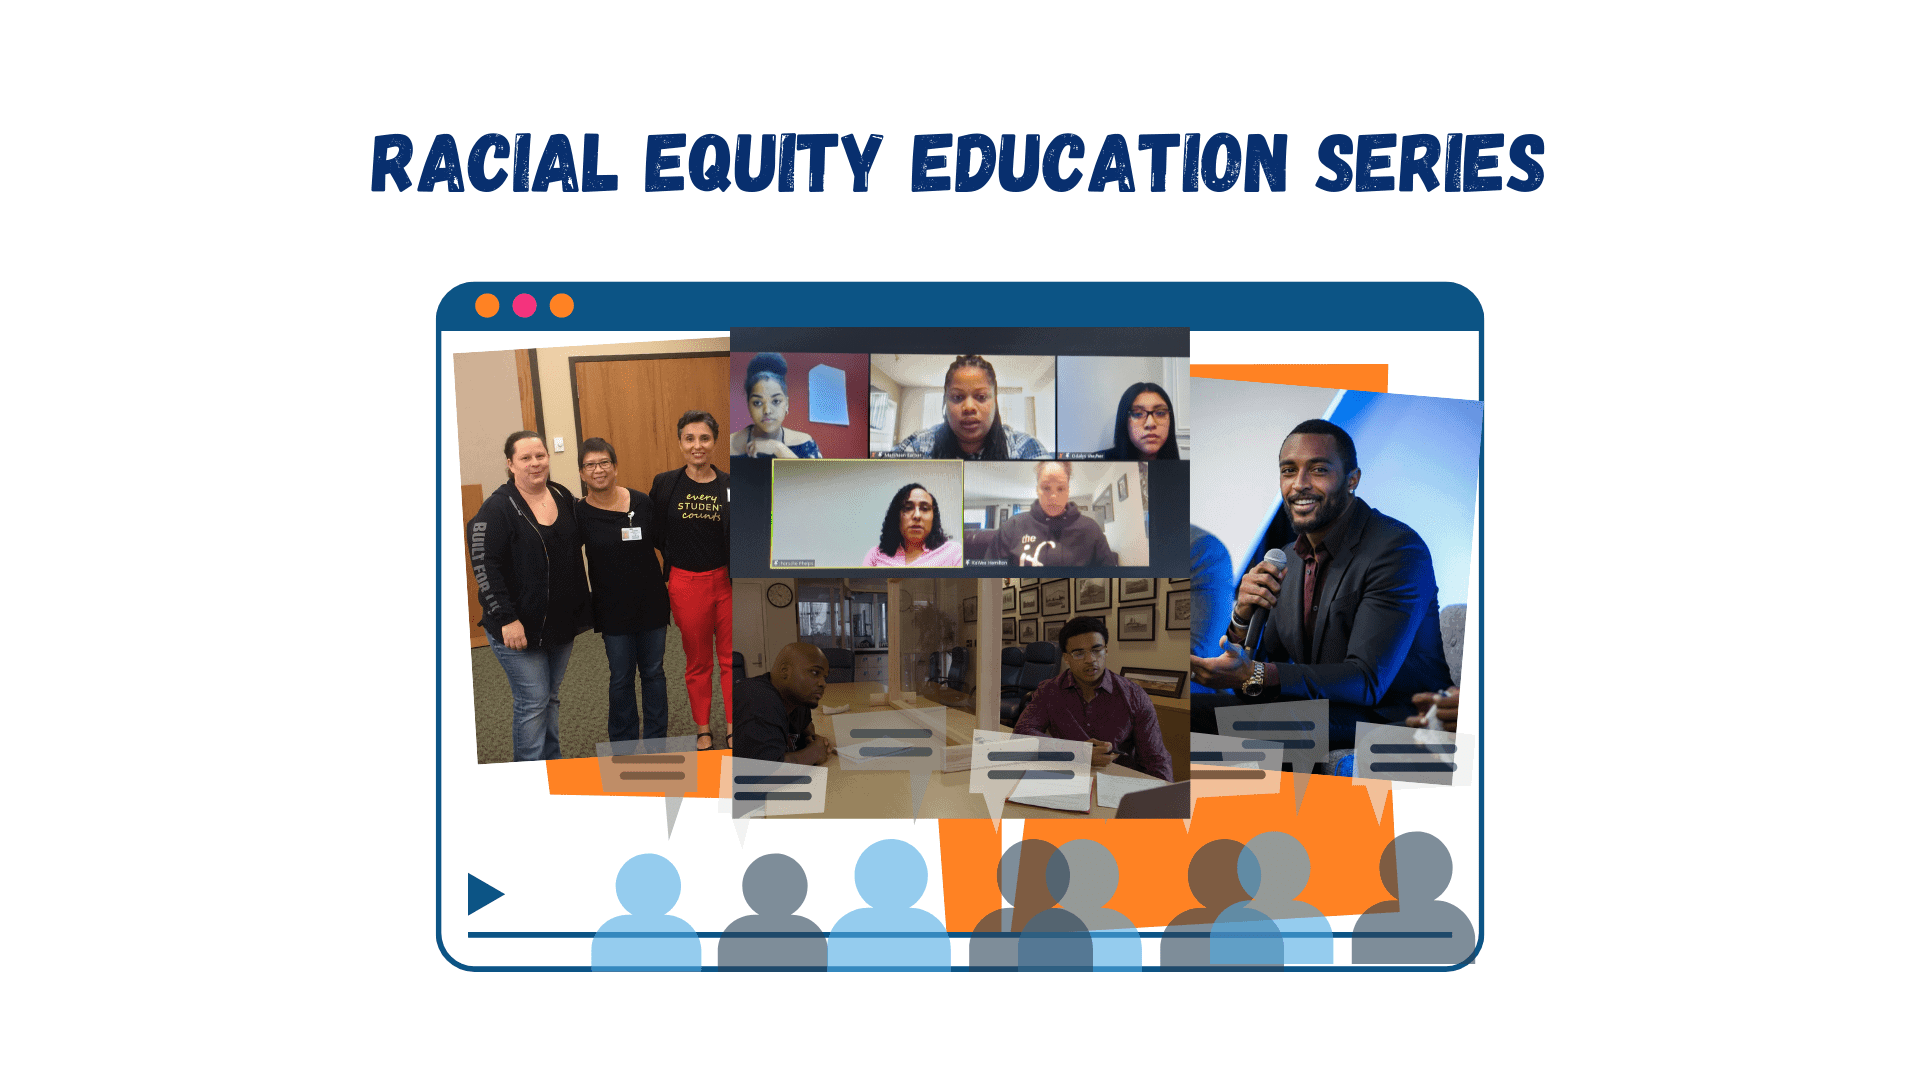 4 separate images are featured inside a video frame with people icons and chat bubbles below. The images are of speakers from the Racial Equity Education Series.